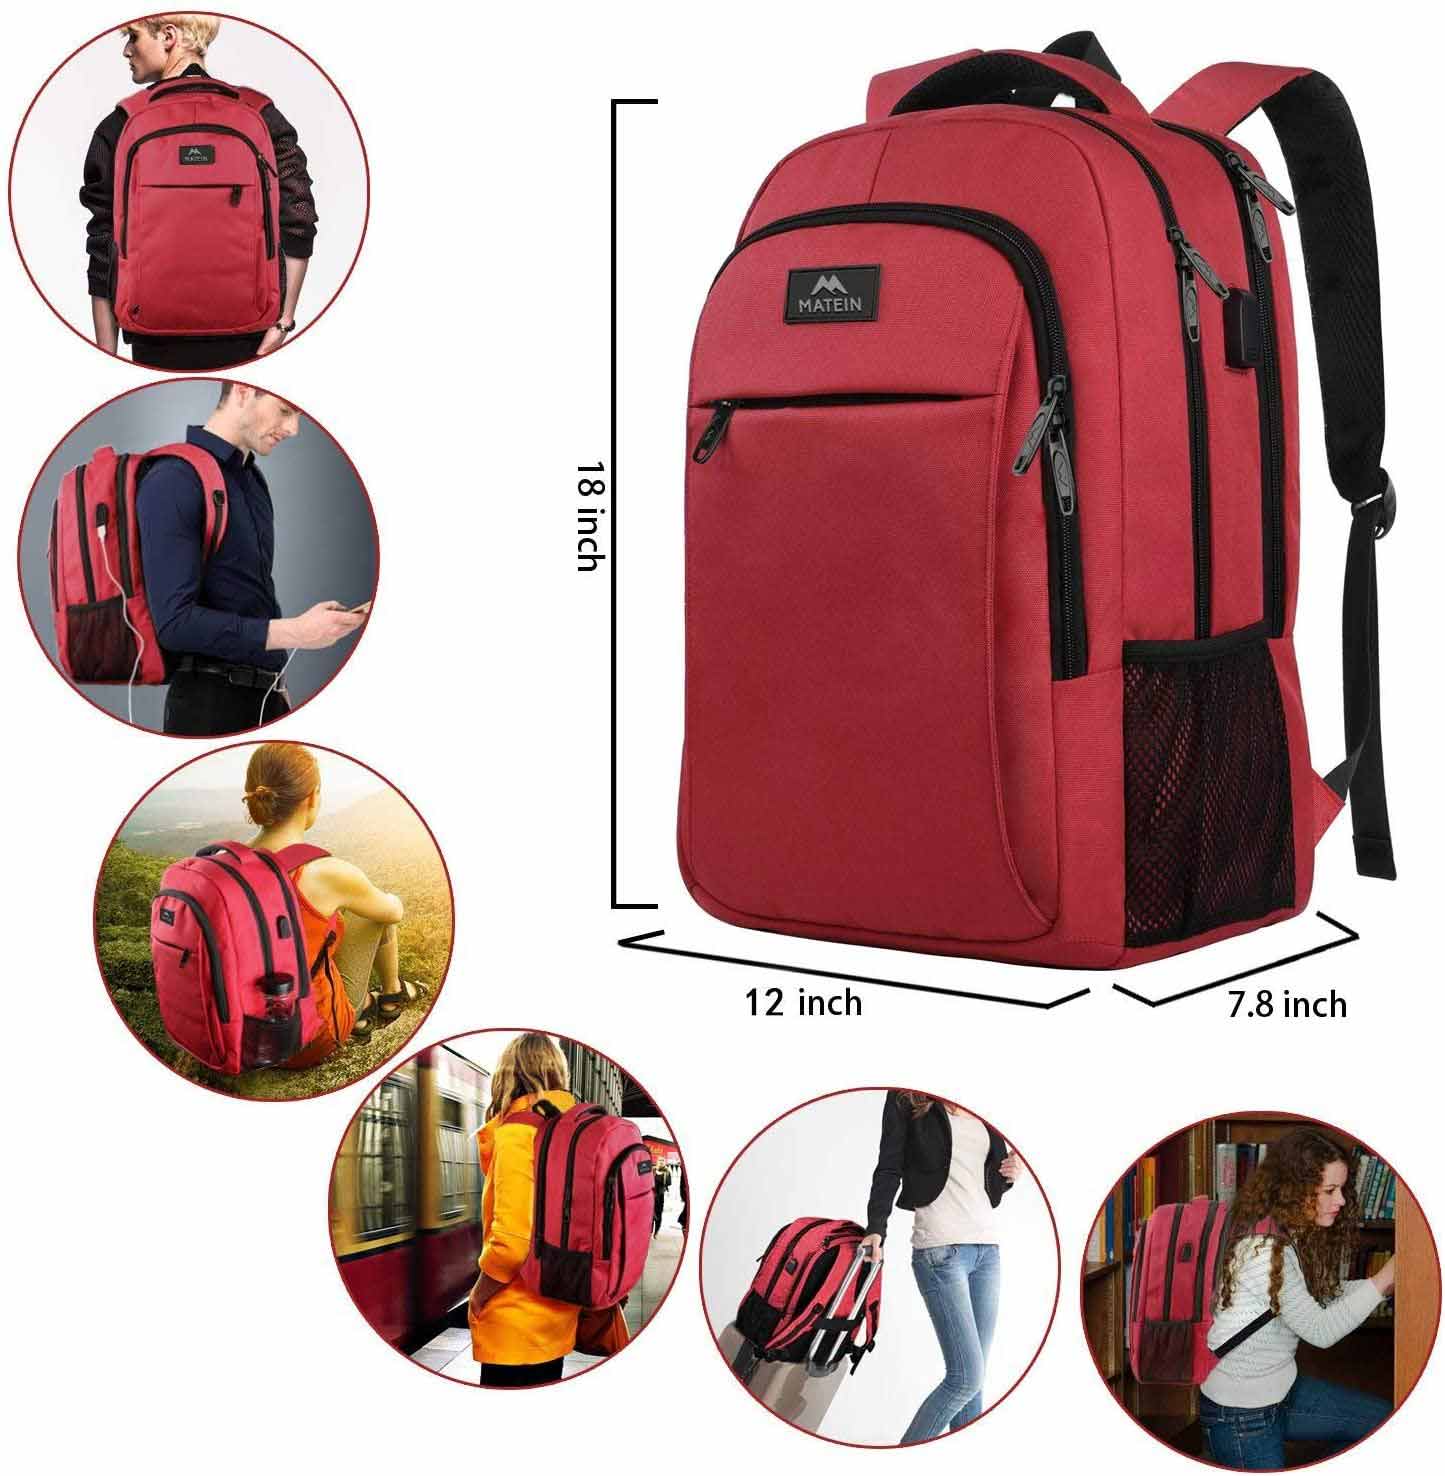 Matein Mlassic Travel Red Laptop Backpack - travel laptop backpack